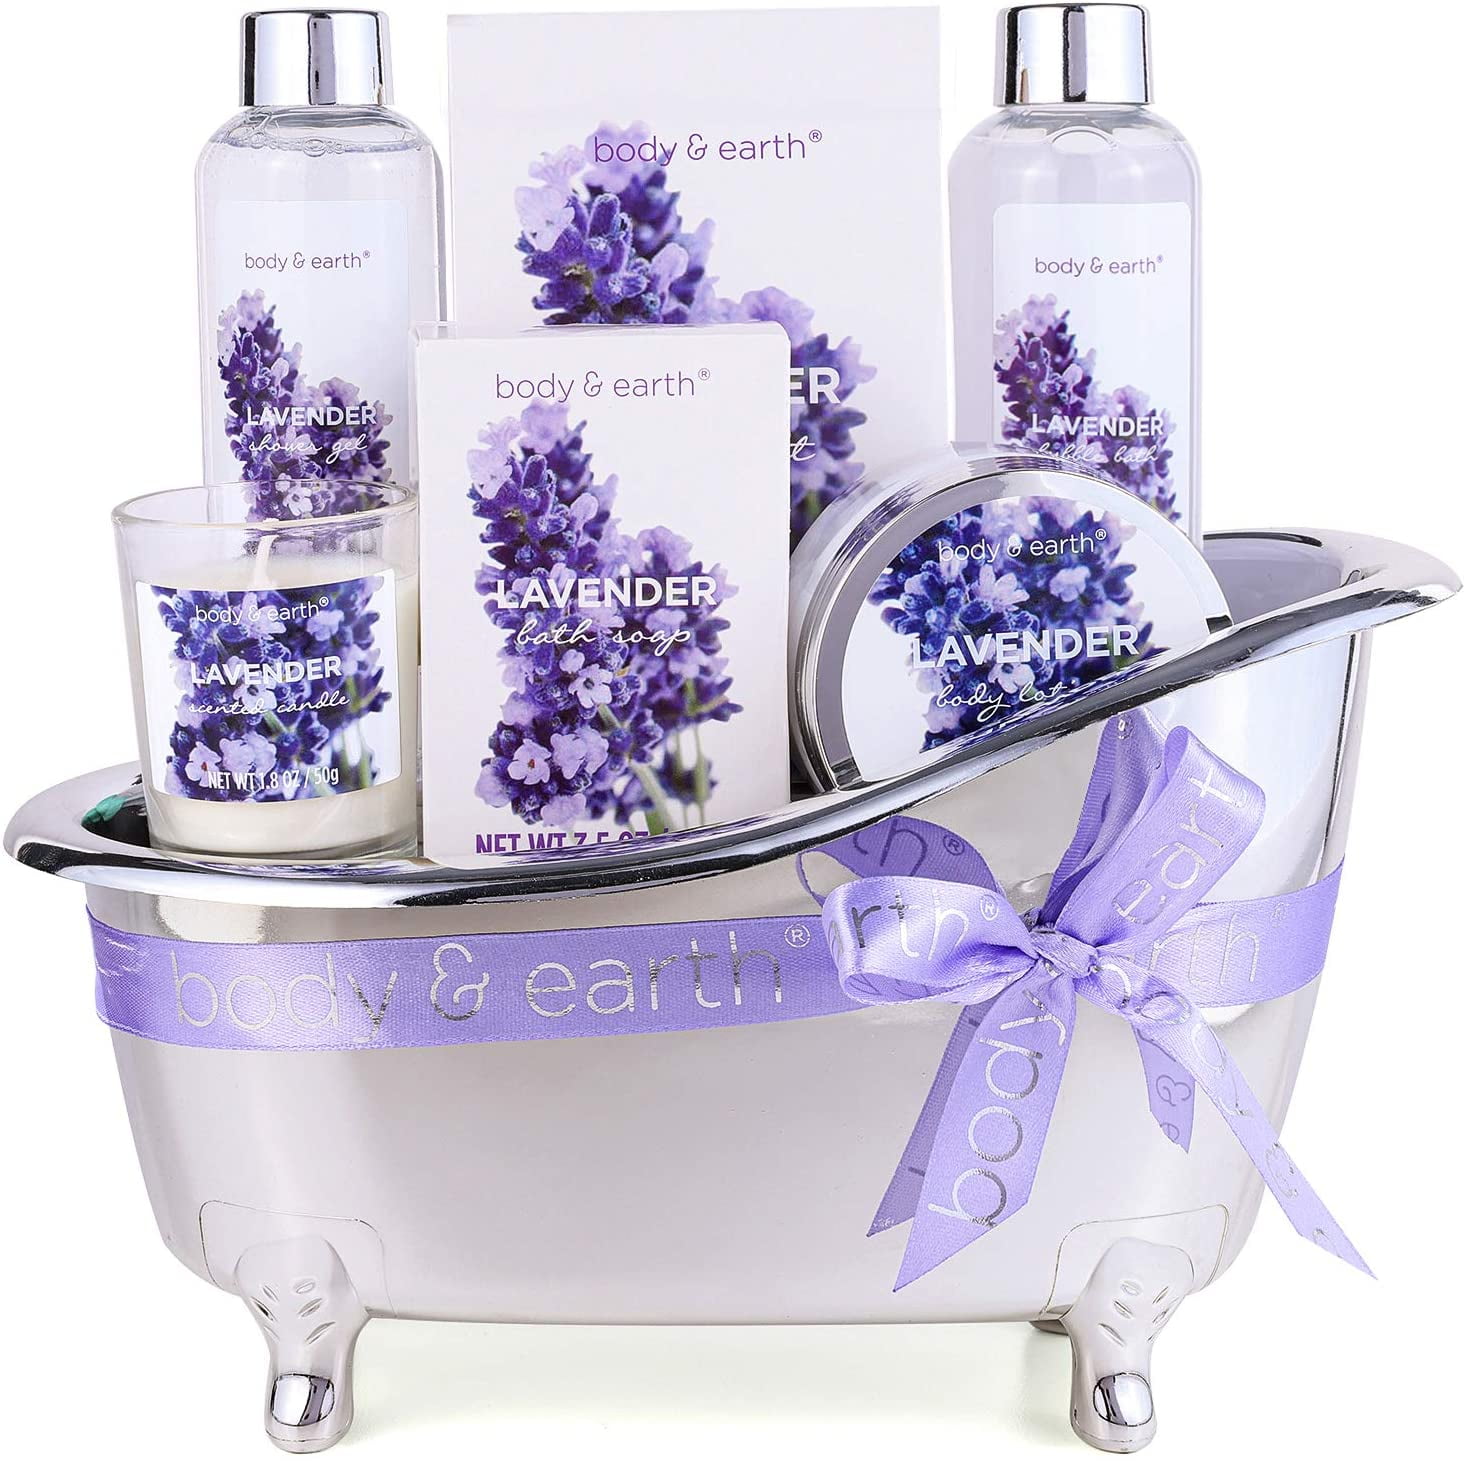 Spa Gifts for Women,Body & Earth Lavender Scented , Gifts